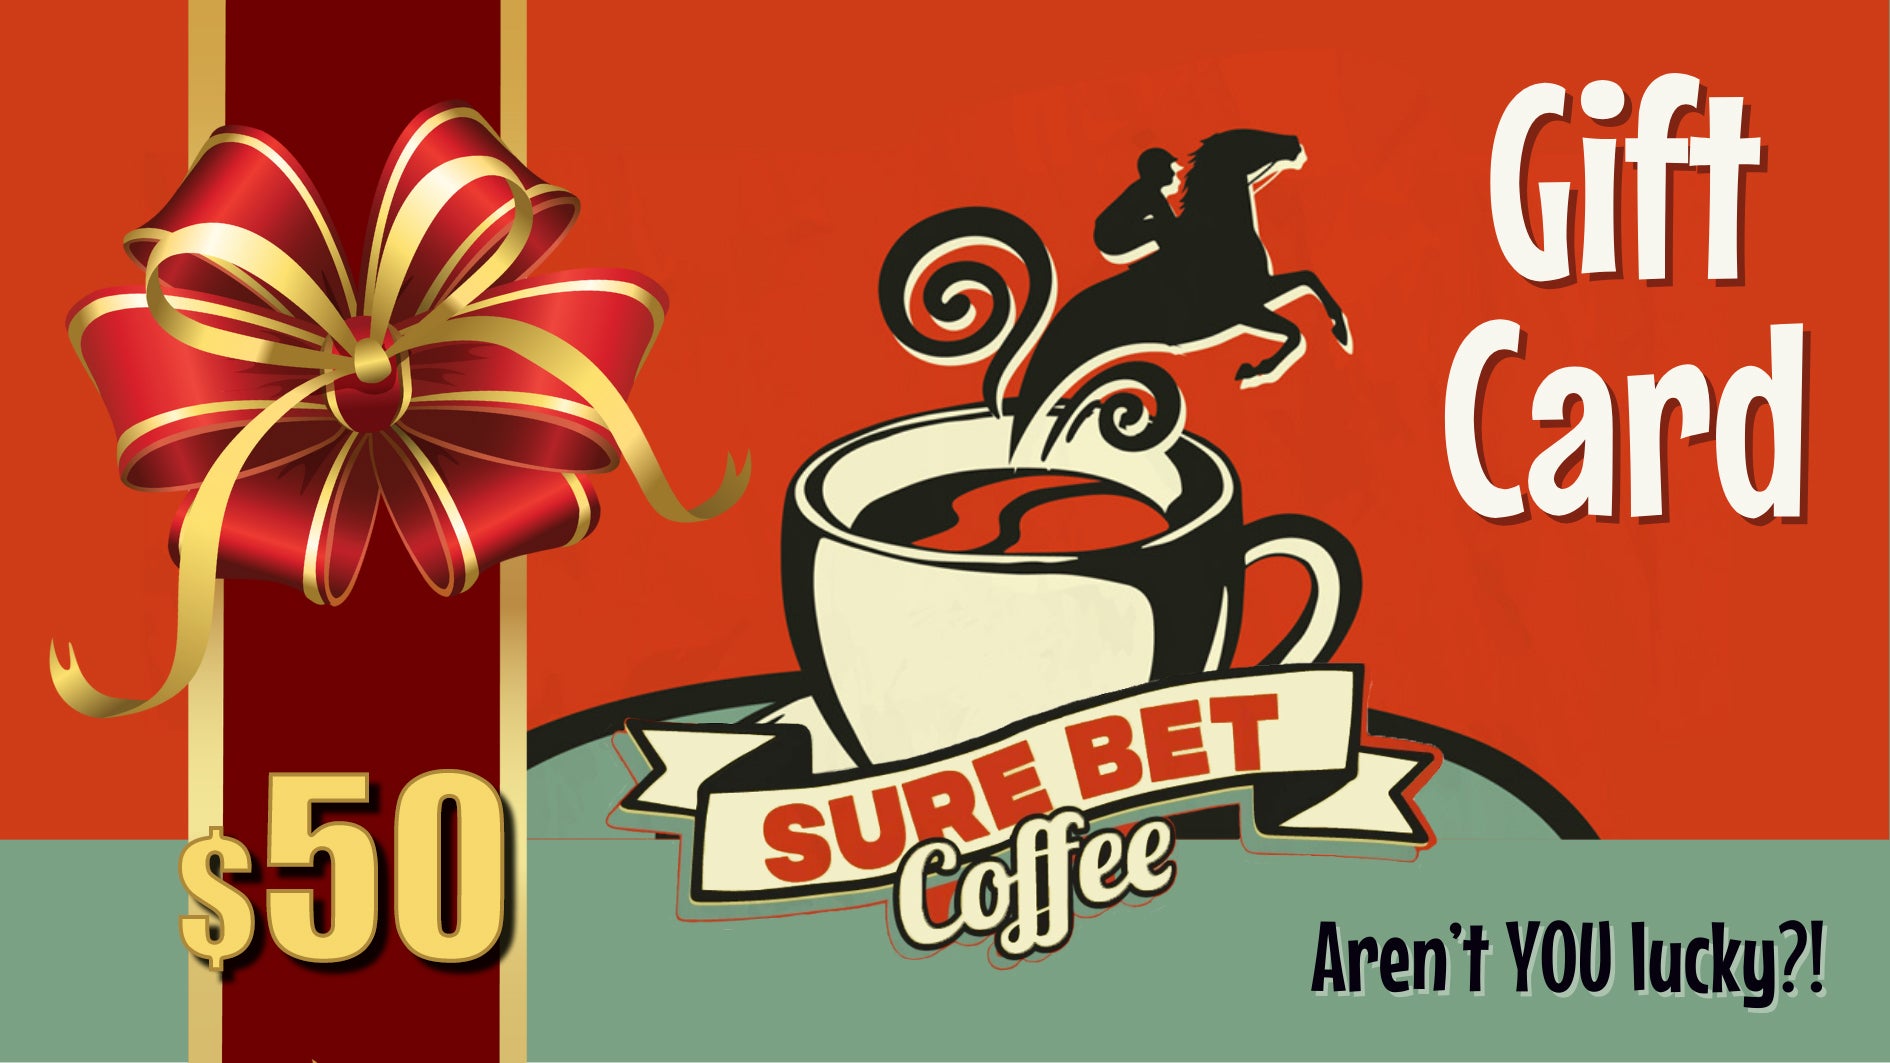 A Sure Bet Coffee $50 Gift Card, redeemable for great ground coffee and snazzy merchandise!